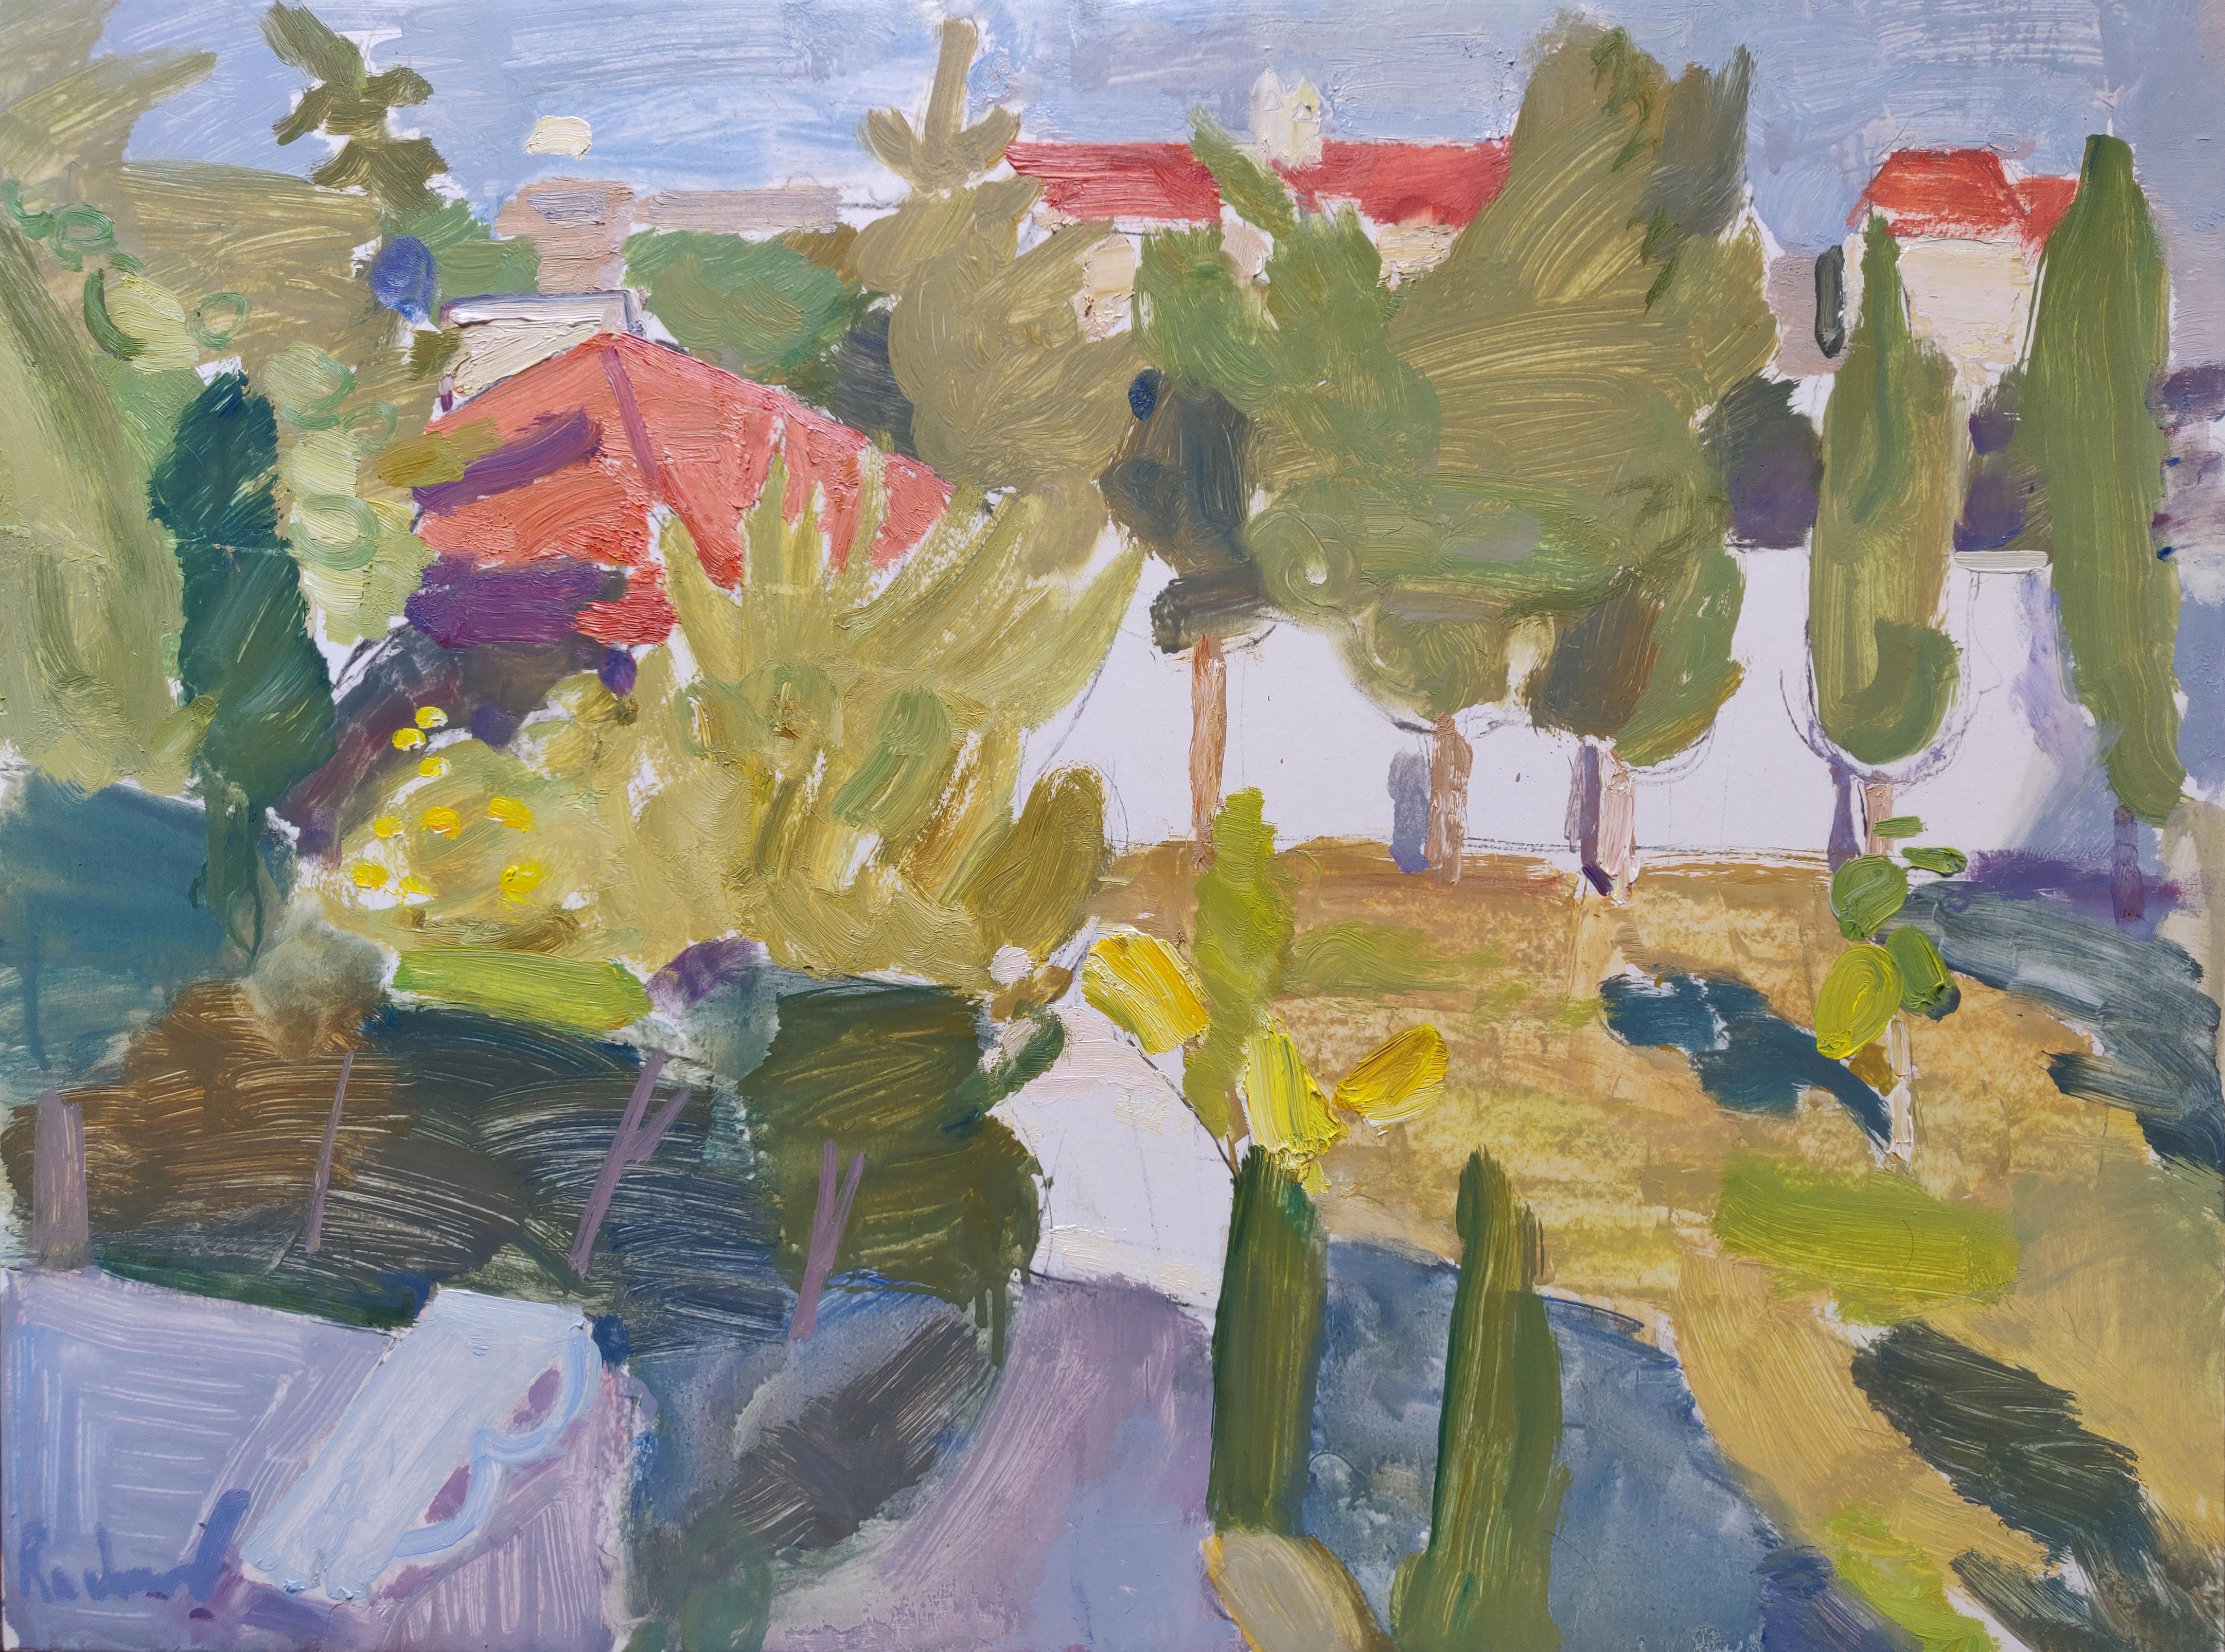 4PM in October - 21st Century Contemporary Garden Oil Painting